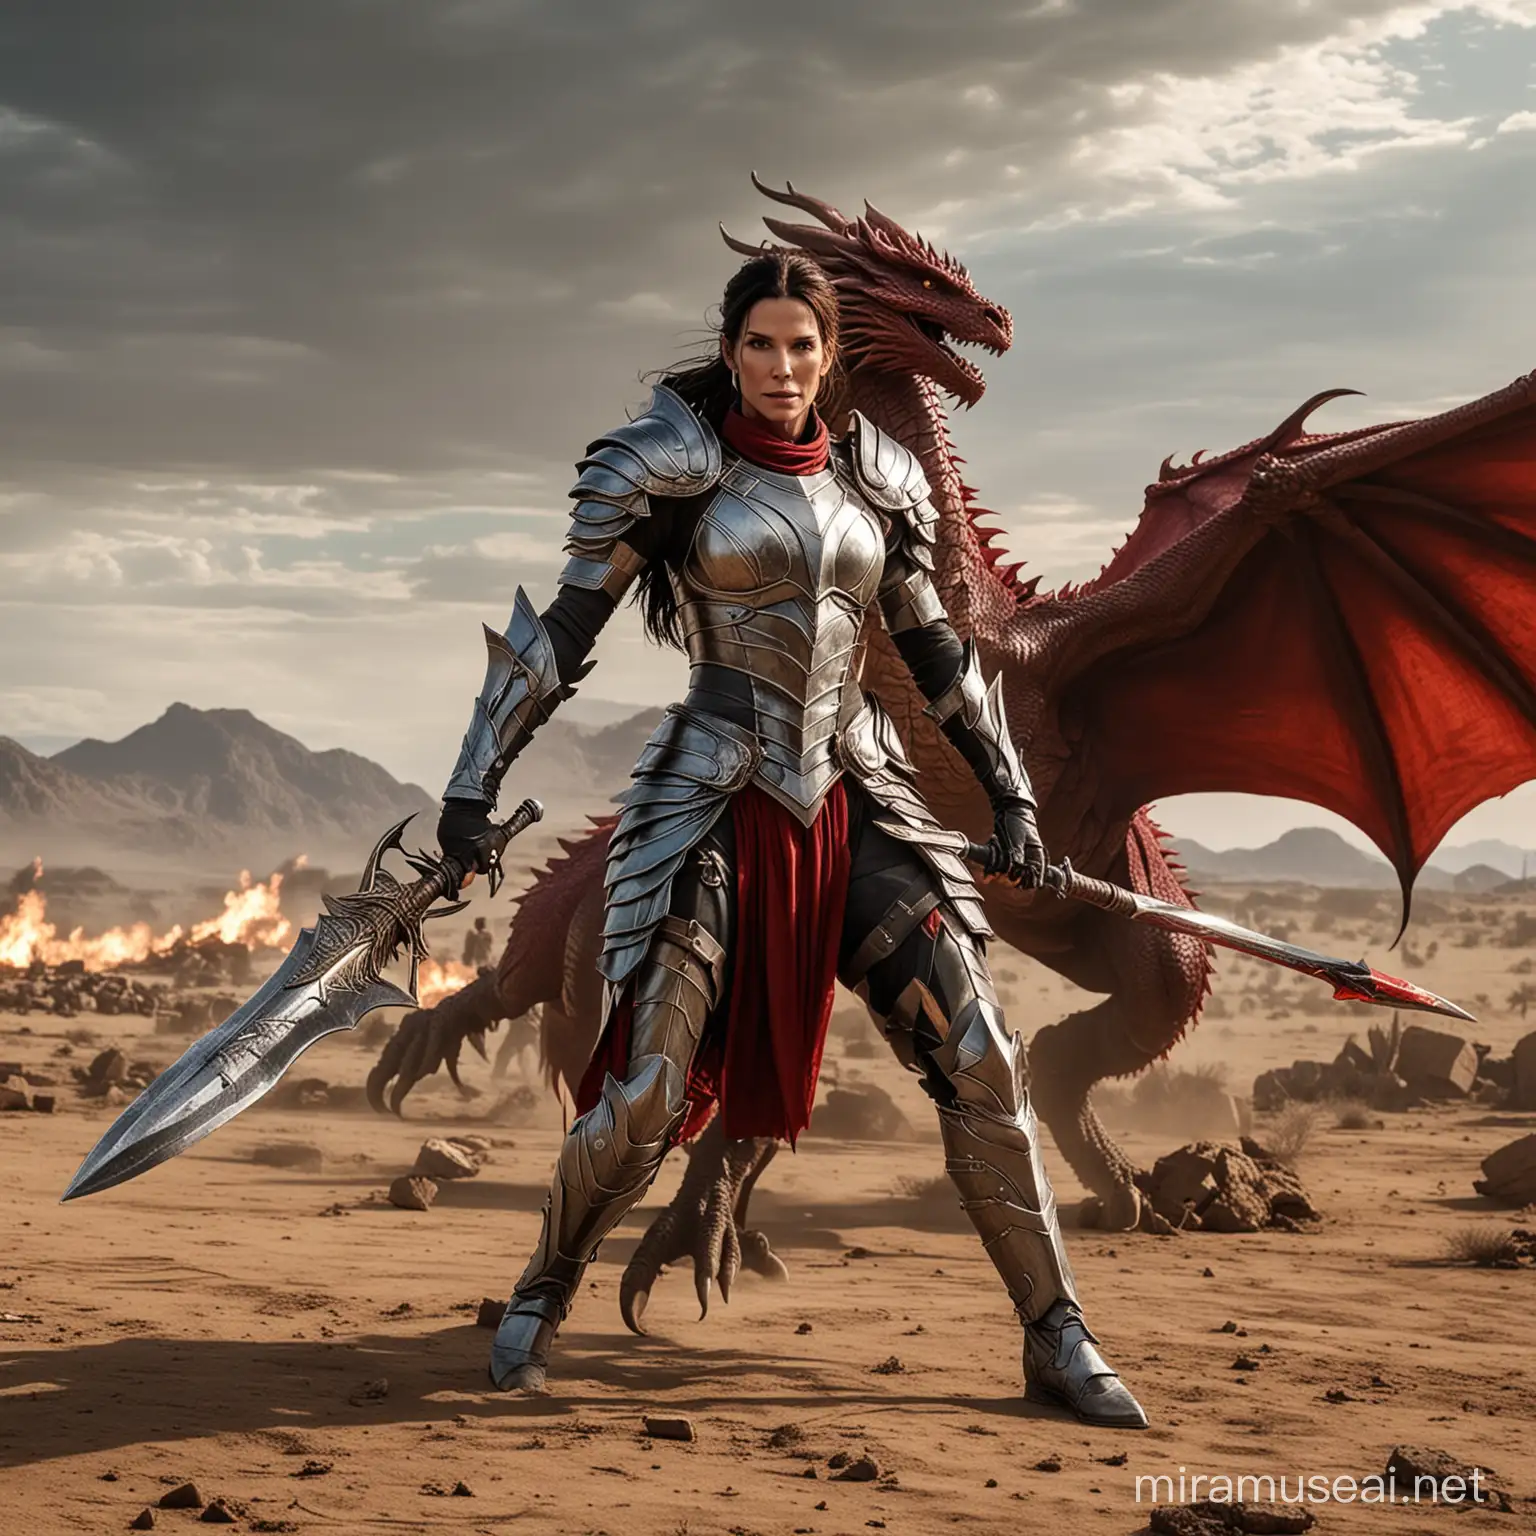 Sandra Bullock in Plate Armor Confronts Red Dragon on Battlefield